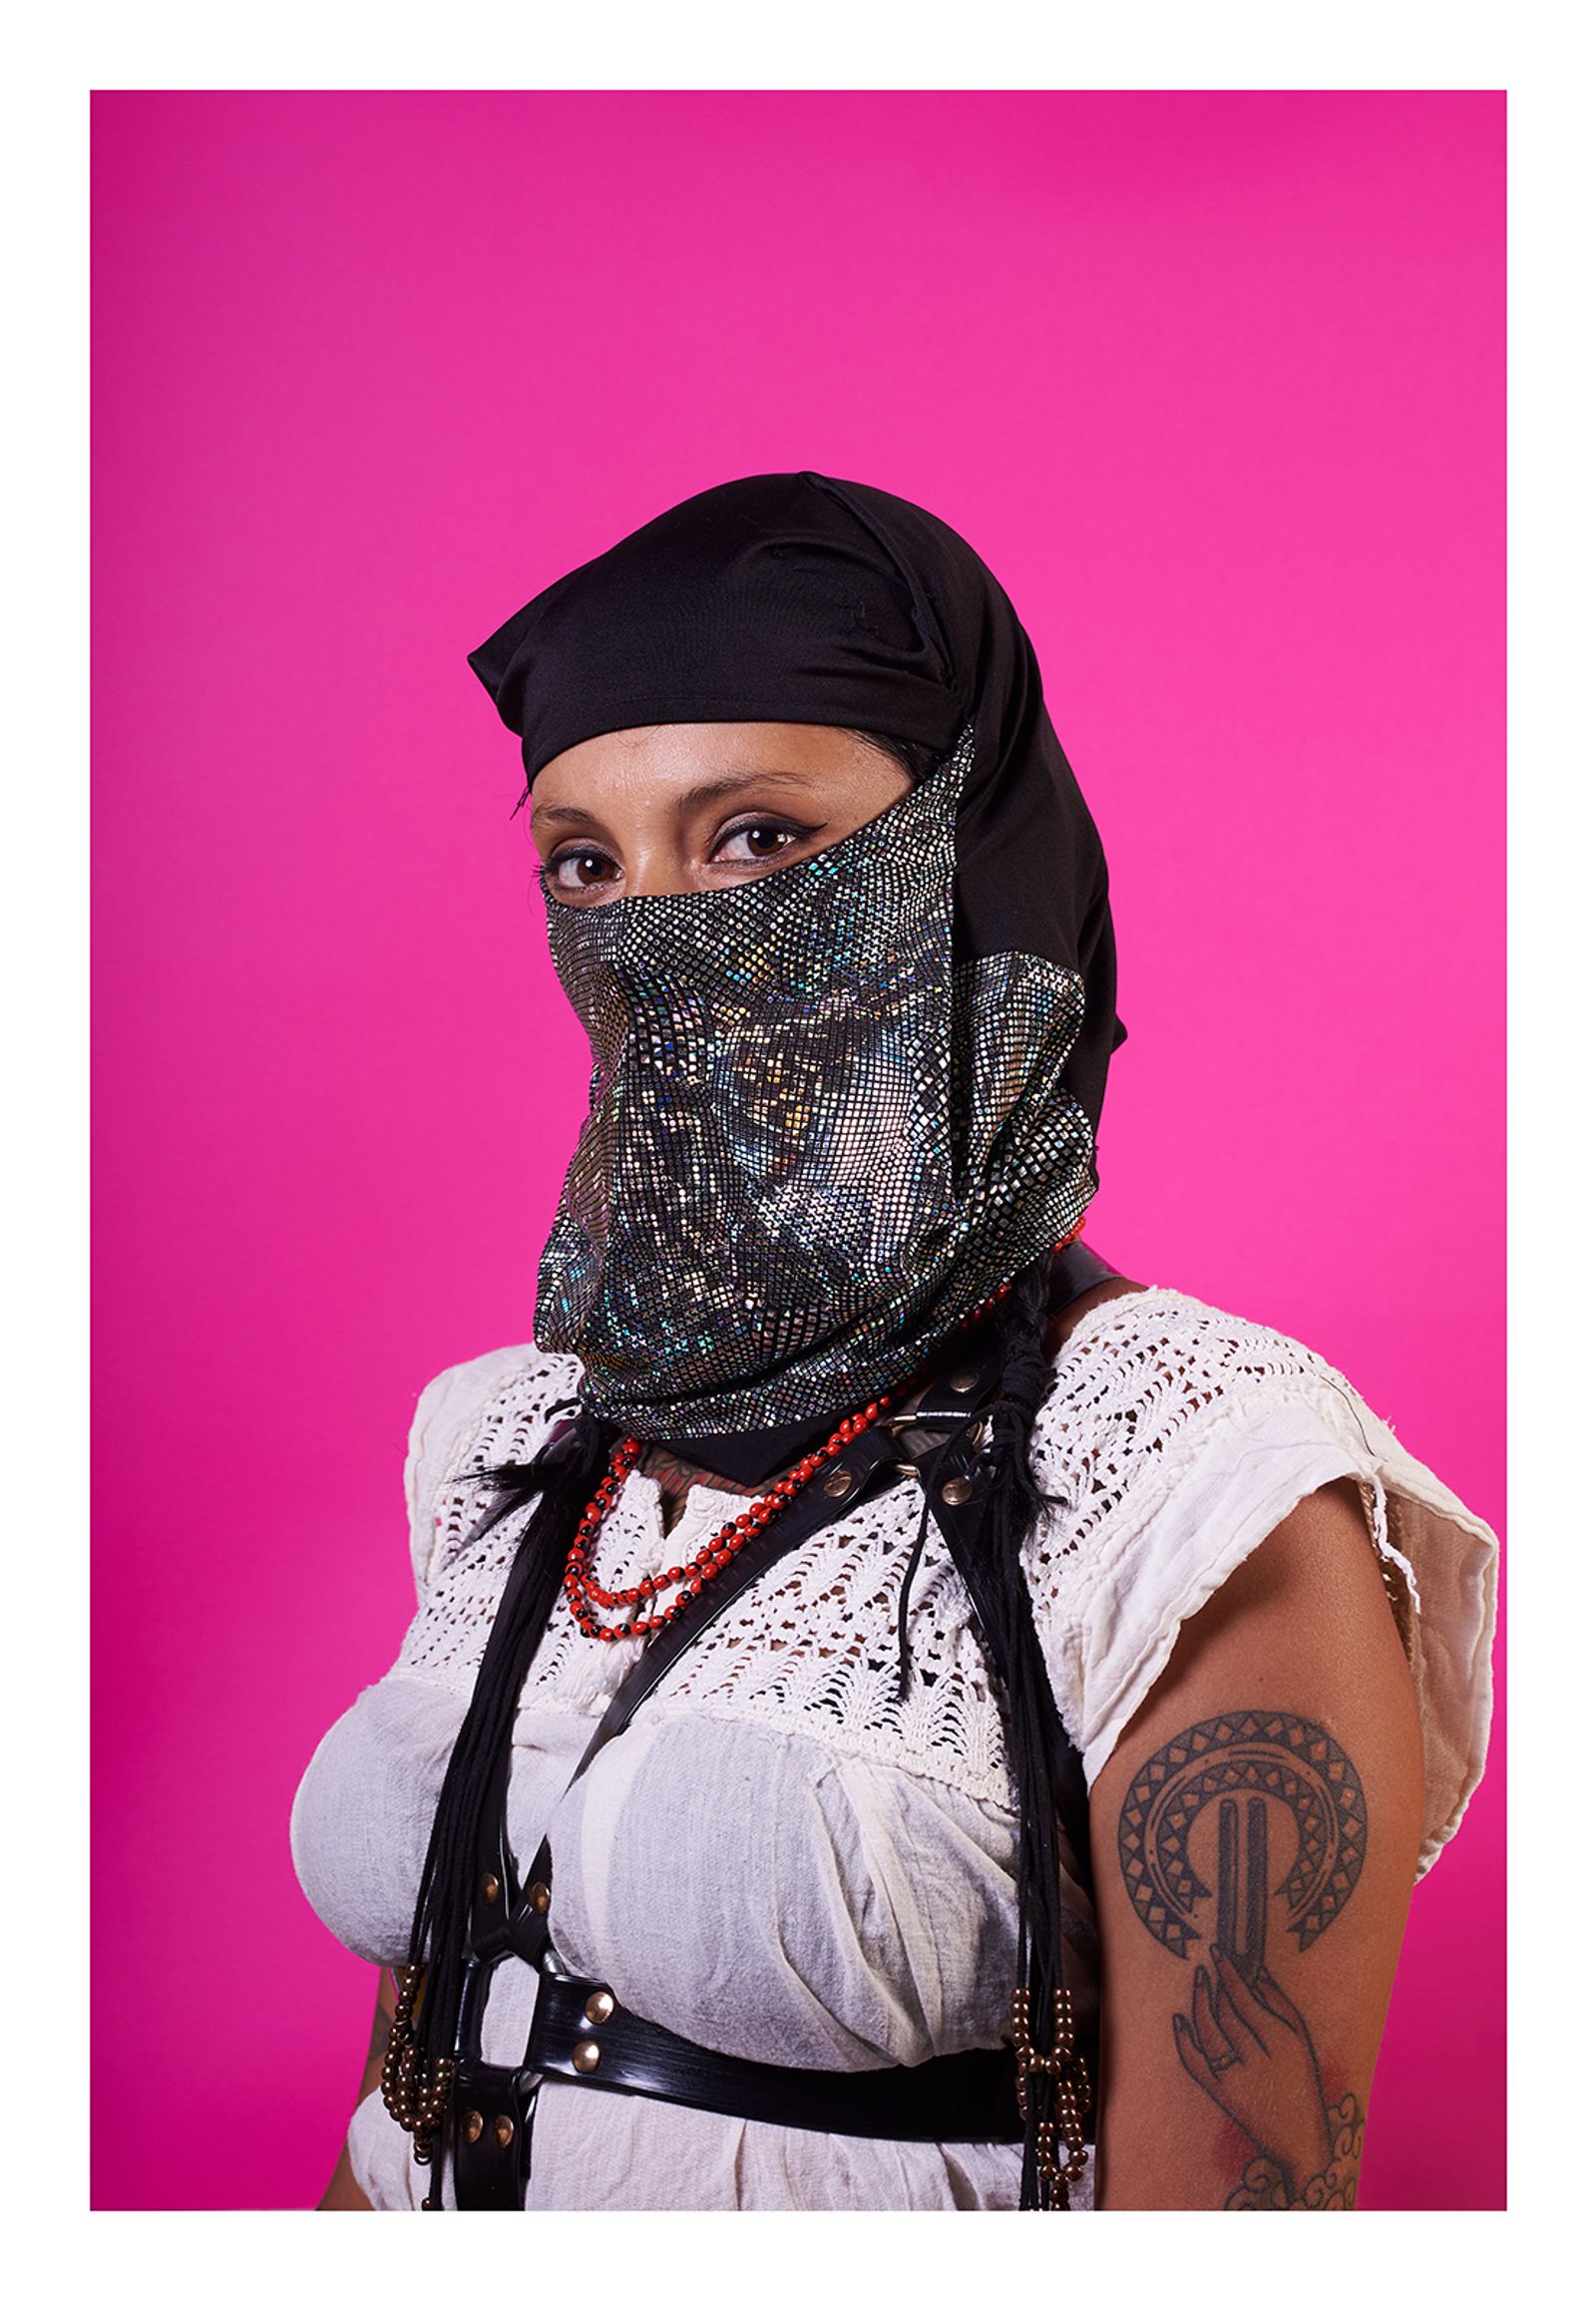 © Jahel Guerra - Image from the Las Migras de Abya Yala & Body Territories photography project